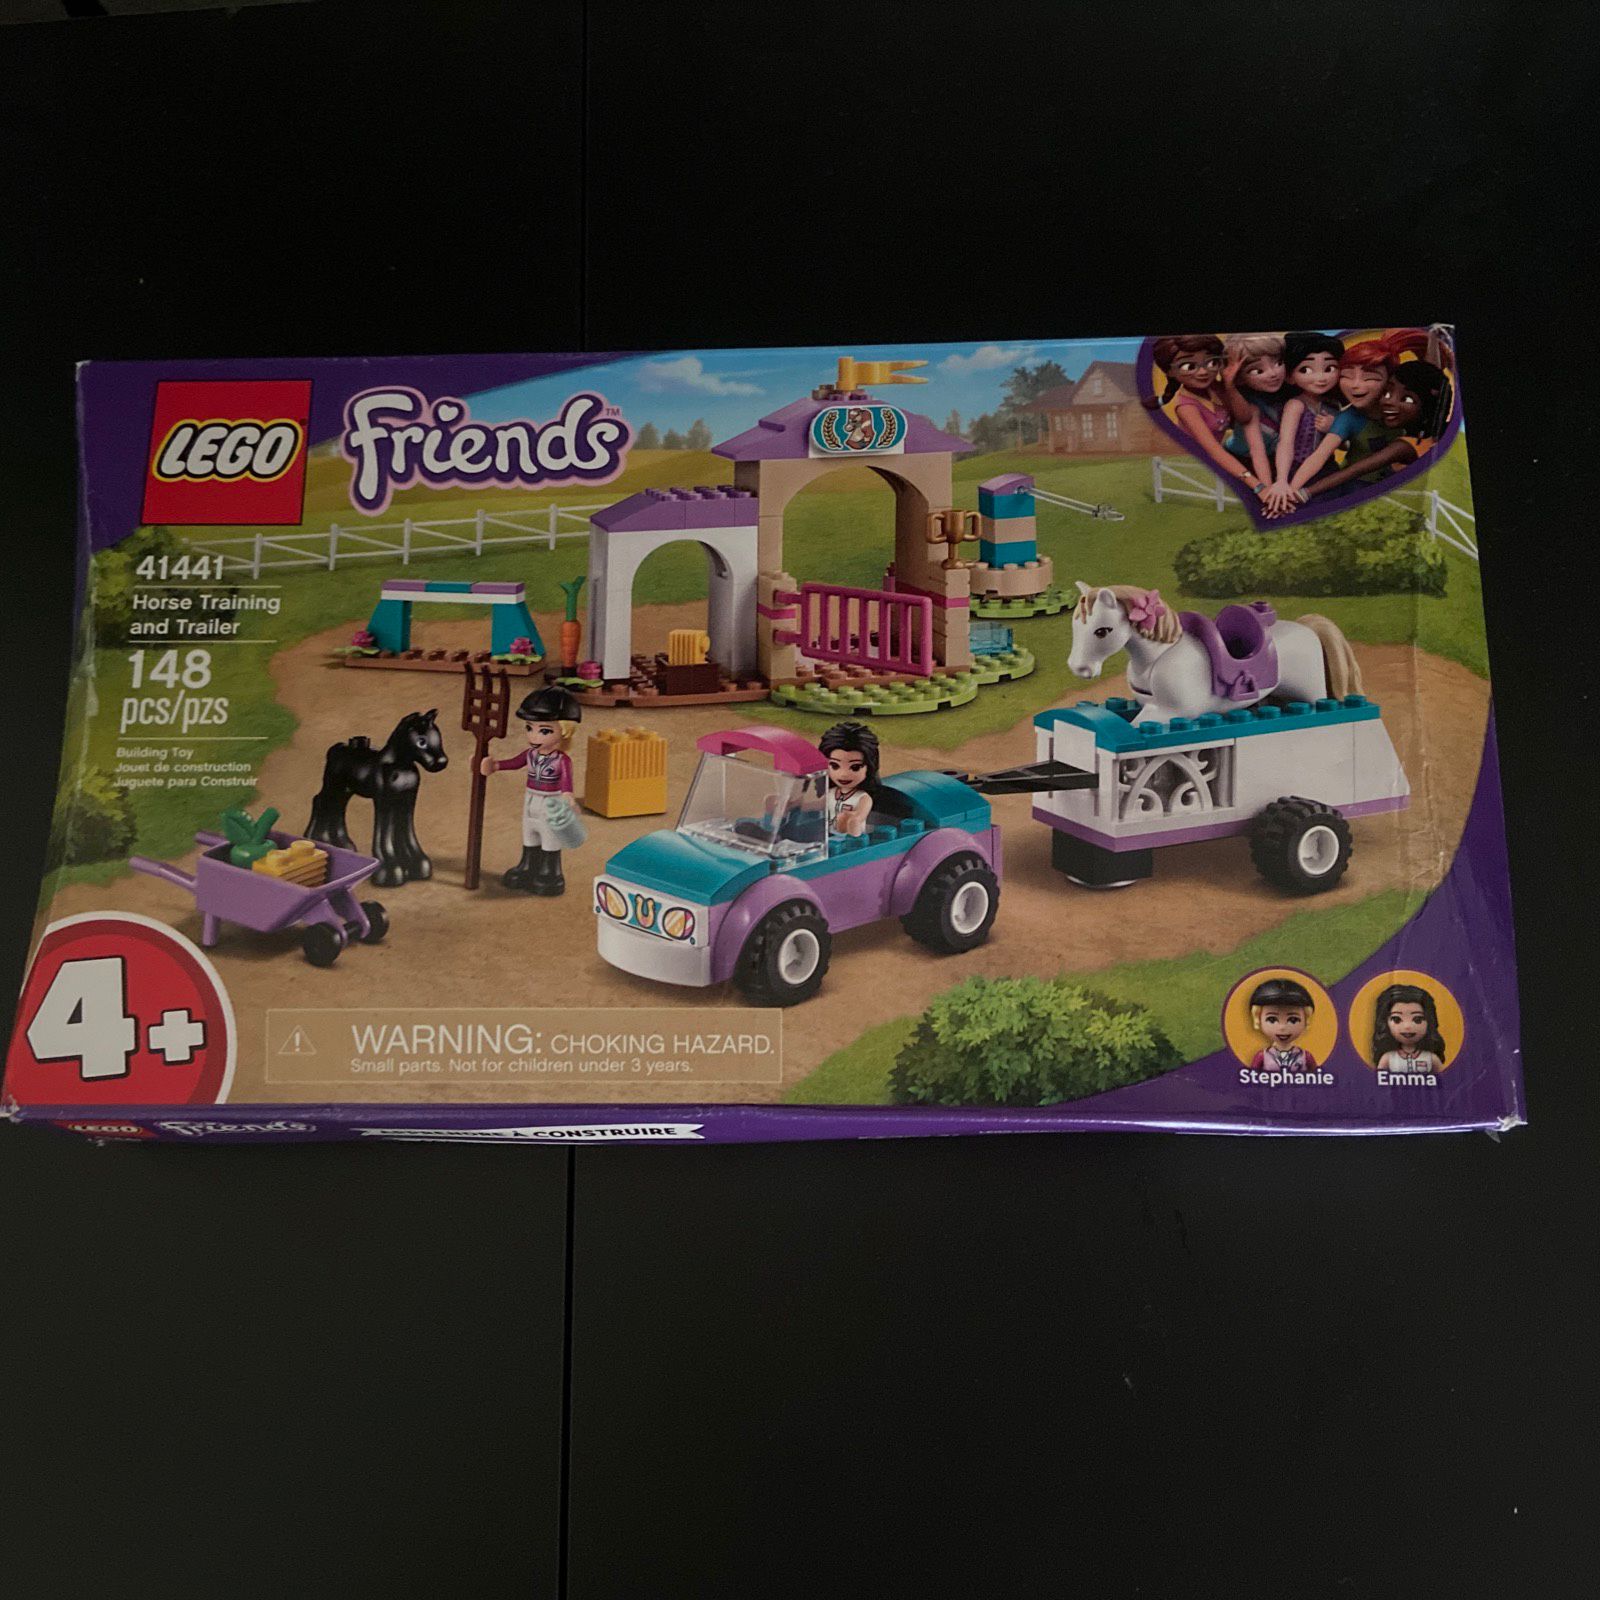 Lego Friends Set 41441 Horse Training and Trailer New